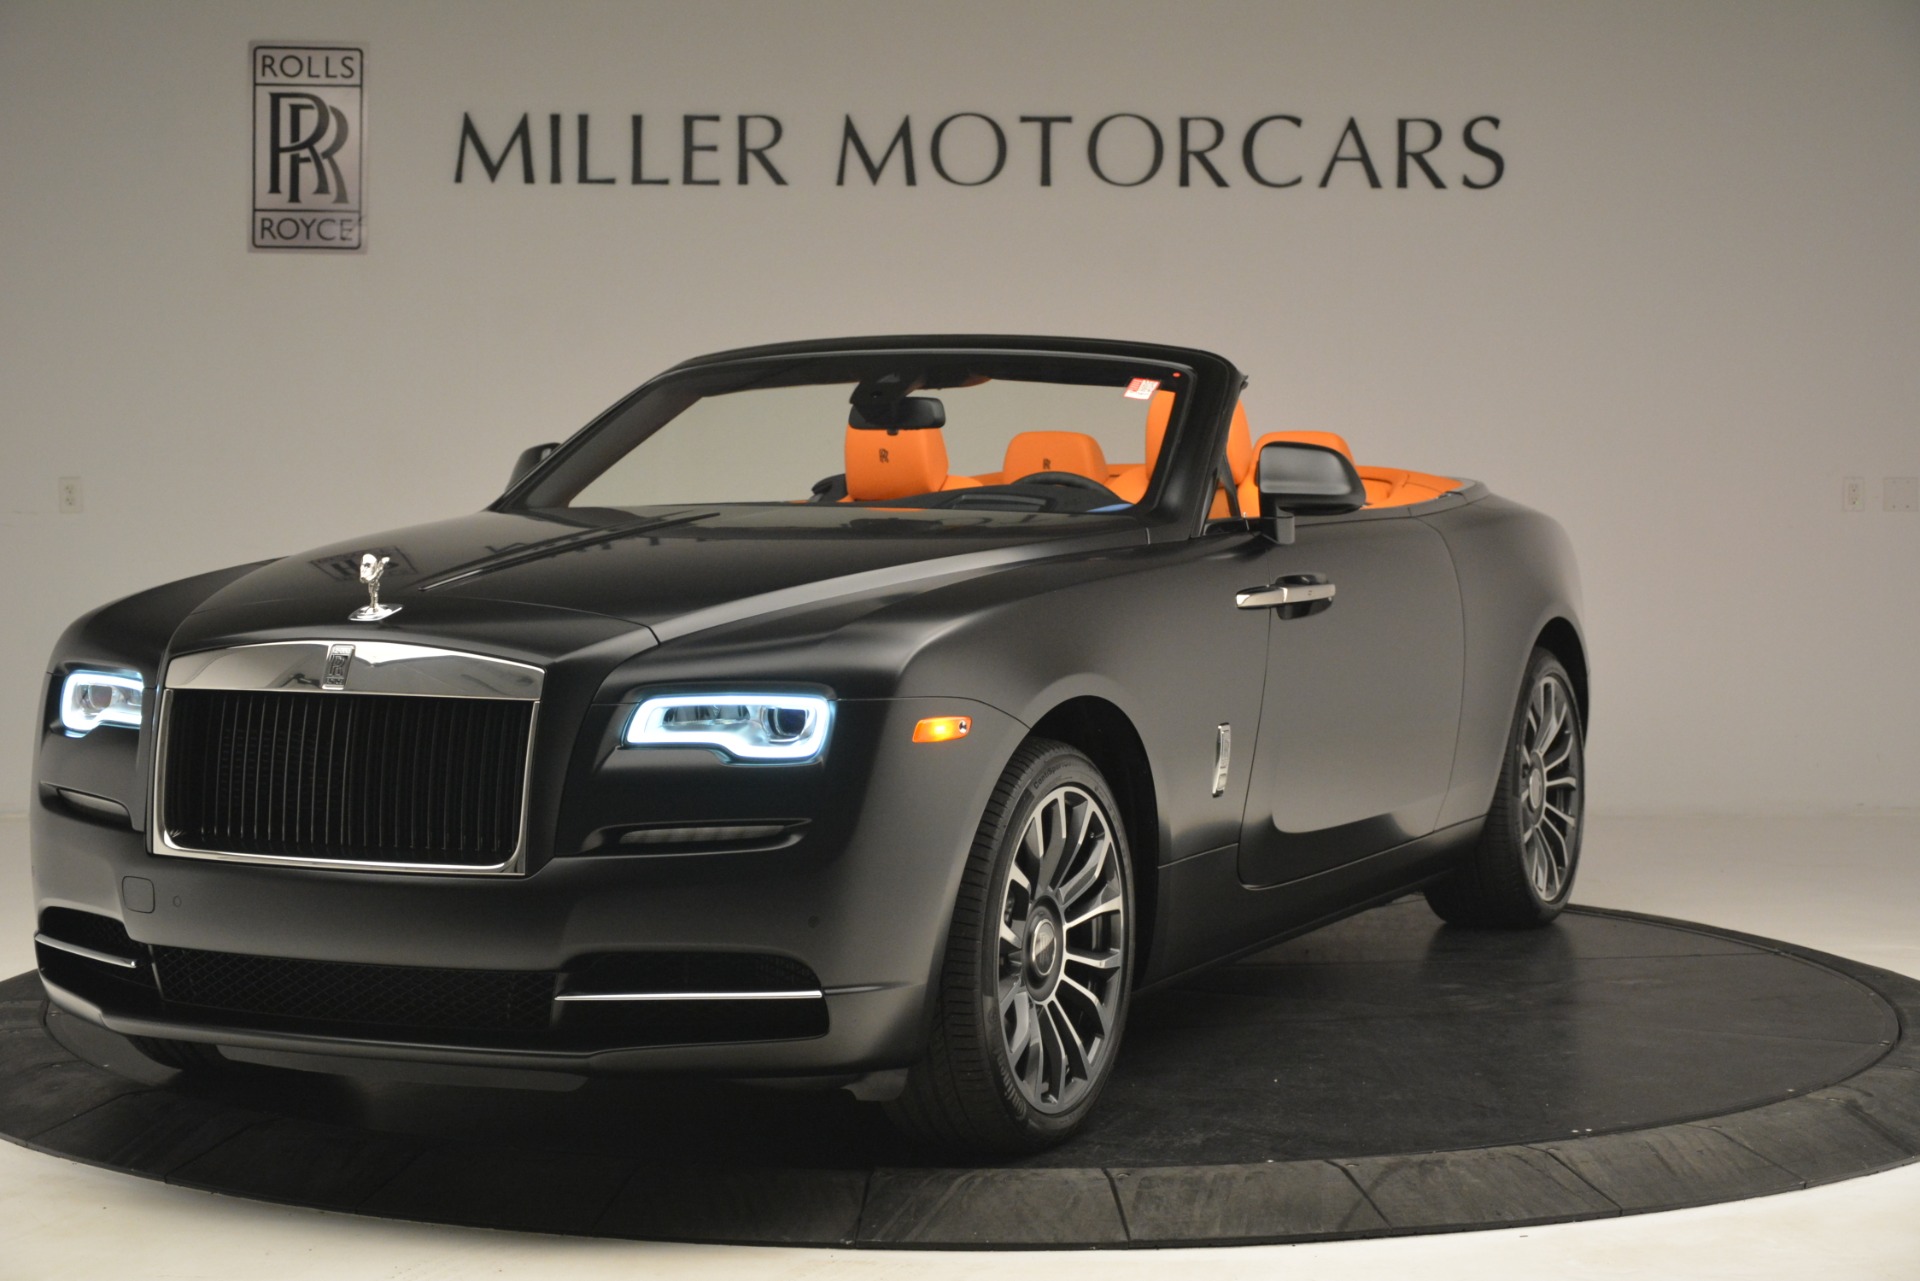 New 2019 RollsRoyce Dawn For Sale Special Pricing  McLaren Greenwich  Stock R510